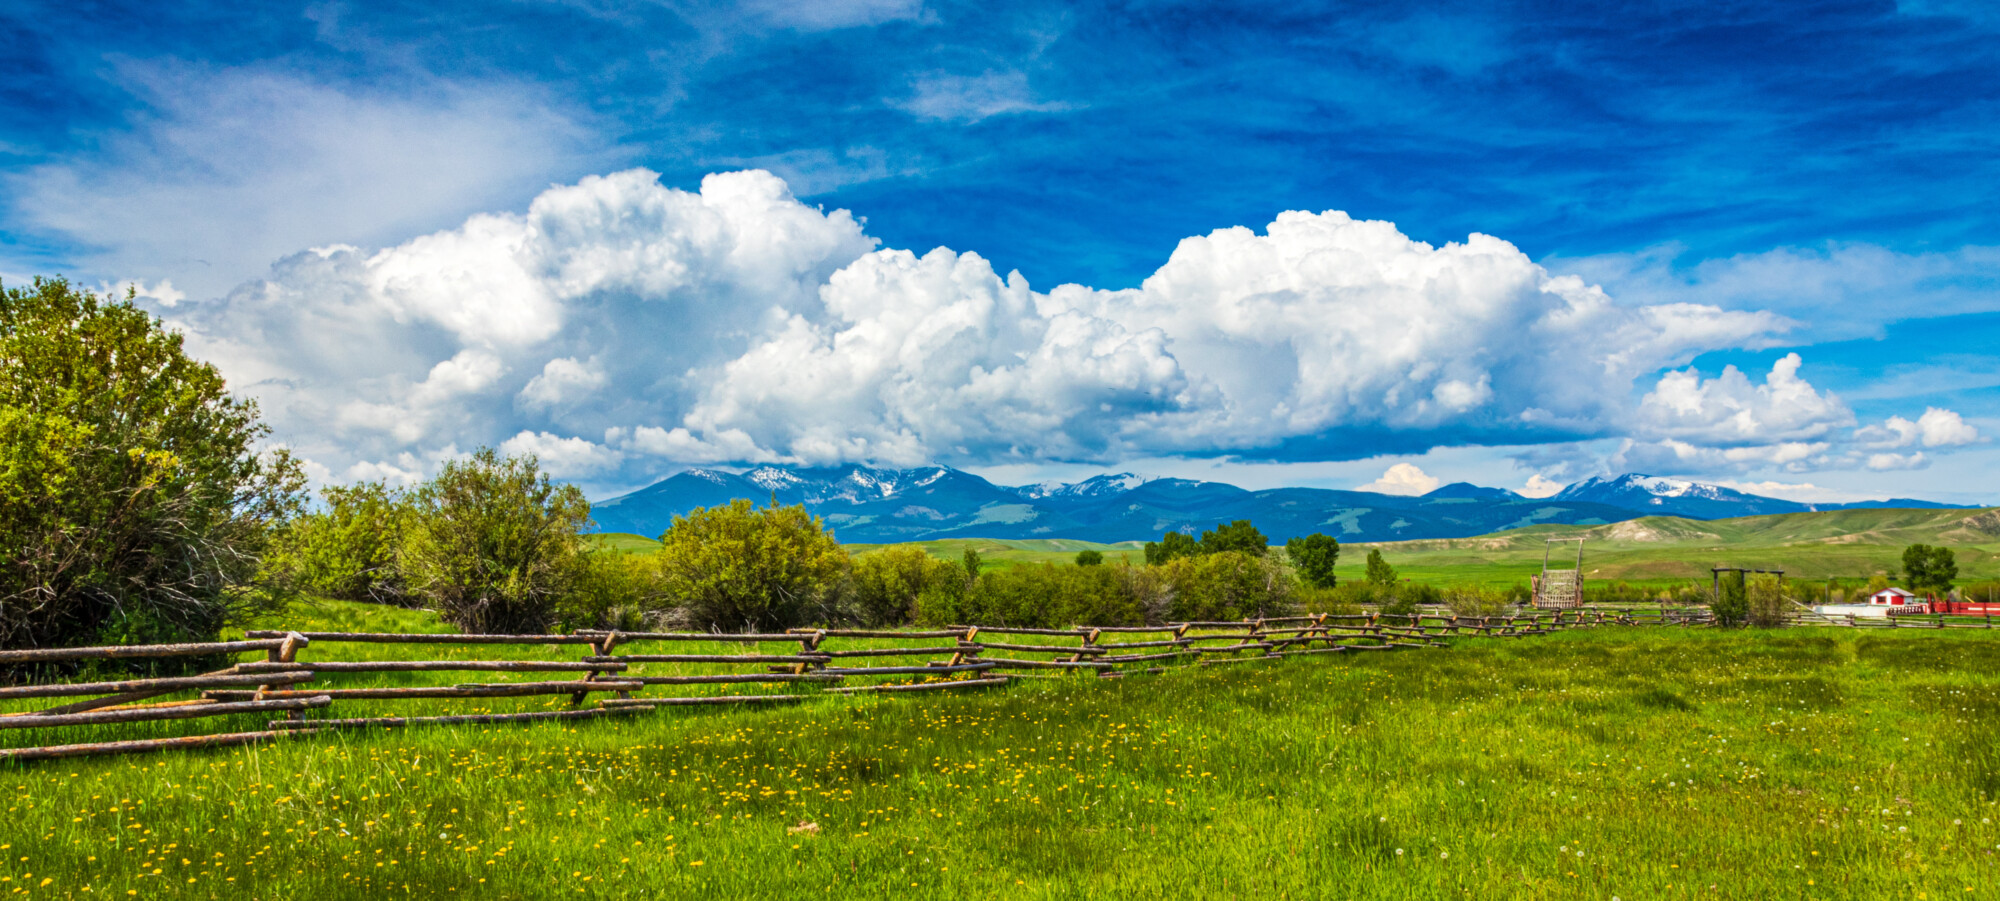 Montana Big Sky Landscape of a ranch fence with clouds and mount